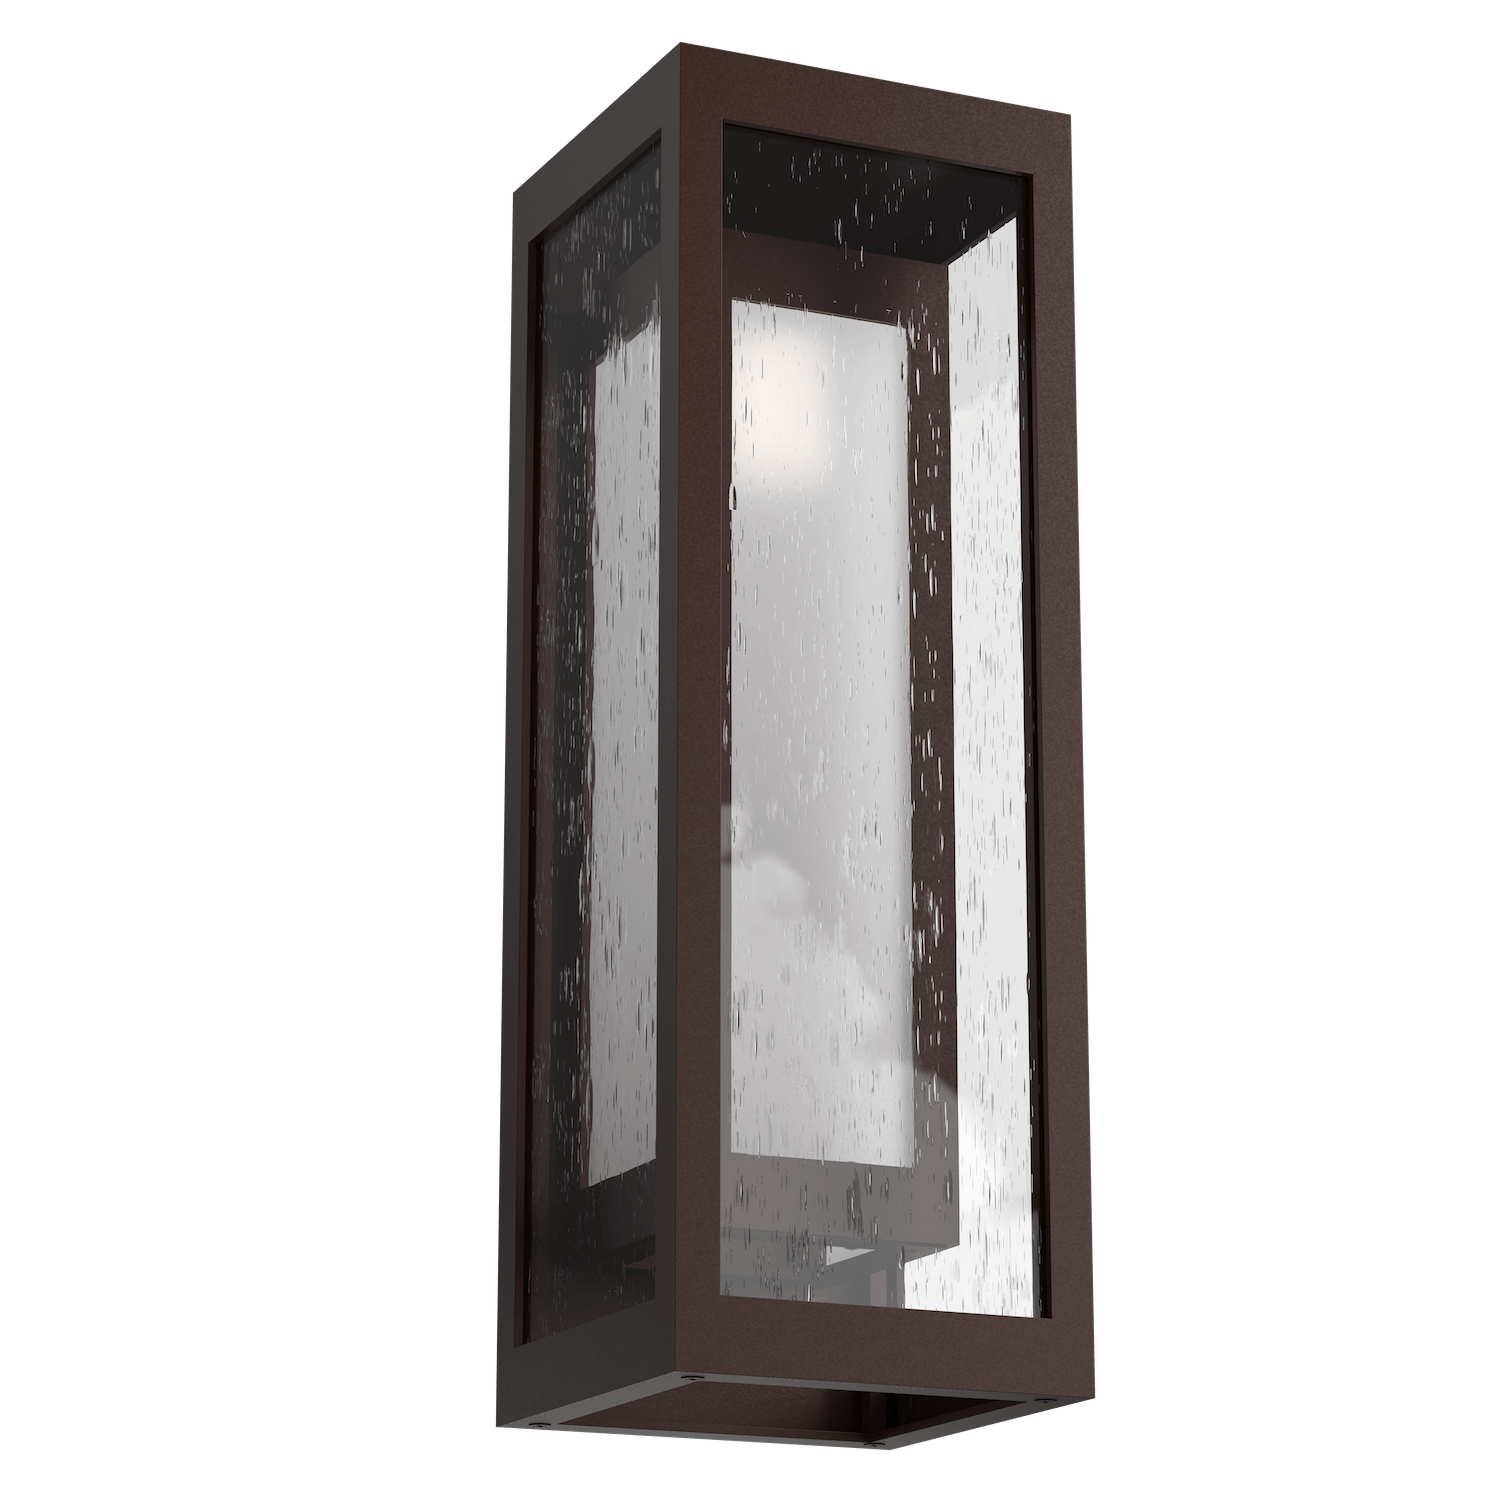 ODB0027-18-SB-F-Hammerton-Studio-Double-Box-18-inch-outdoor-sconce-with-statuary-bronze-finish-and-frosted-glass-shade-and-LED-lamping